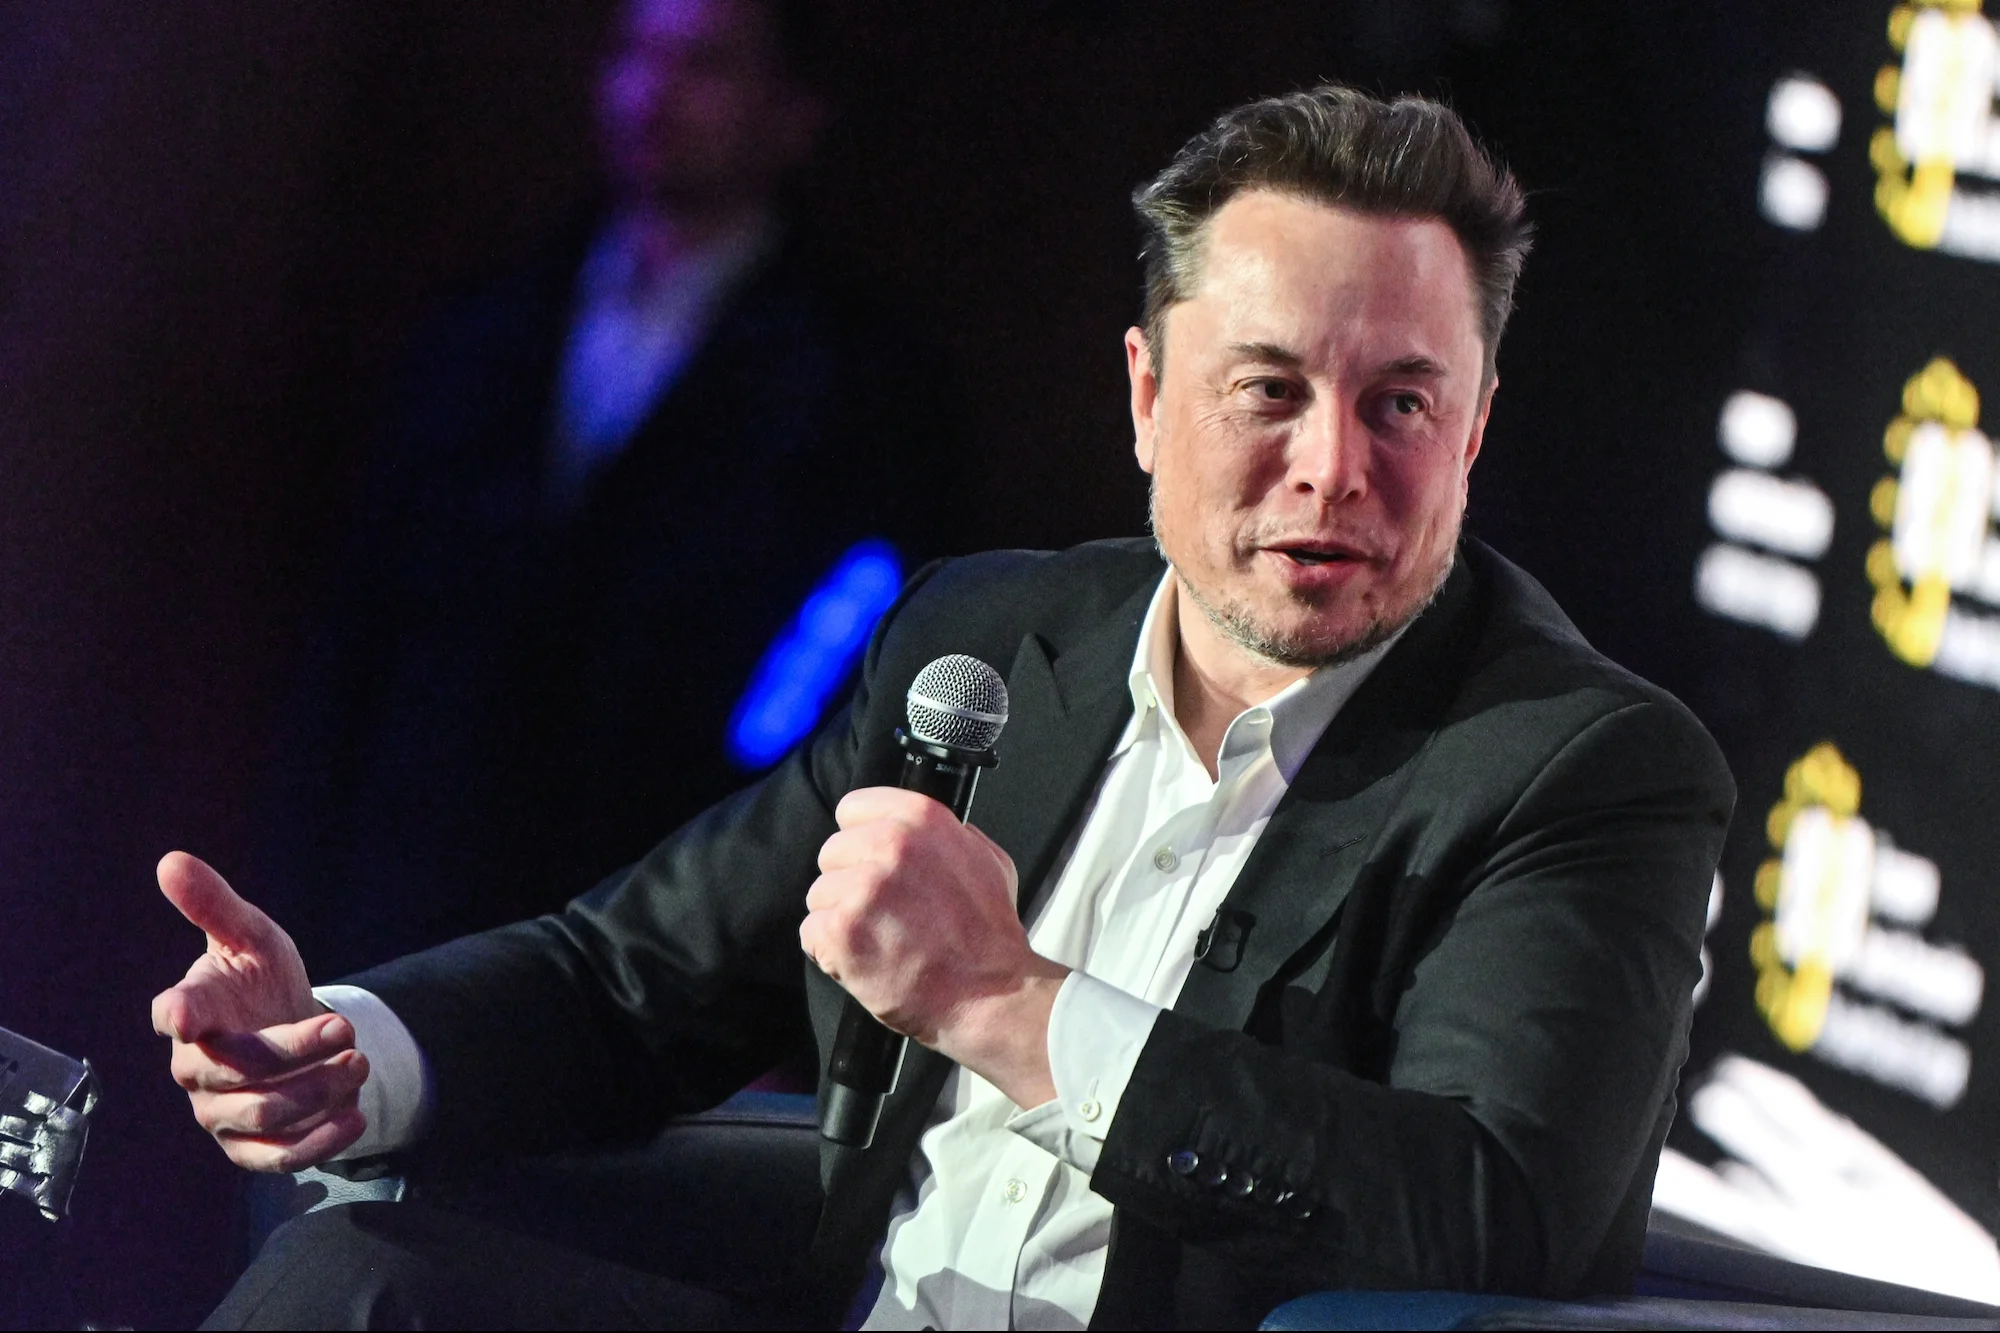 Elon Musk Says Neuralink Just Implanted Its ‘Telepathy’ Device in a Human Brain for the First Time — Here’s What That Means